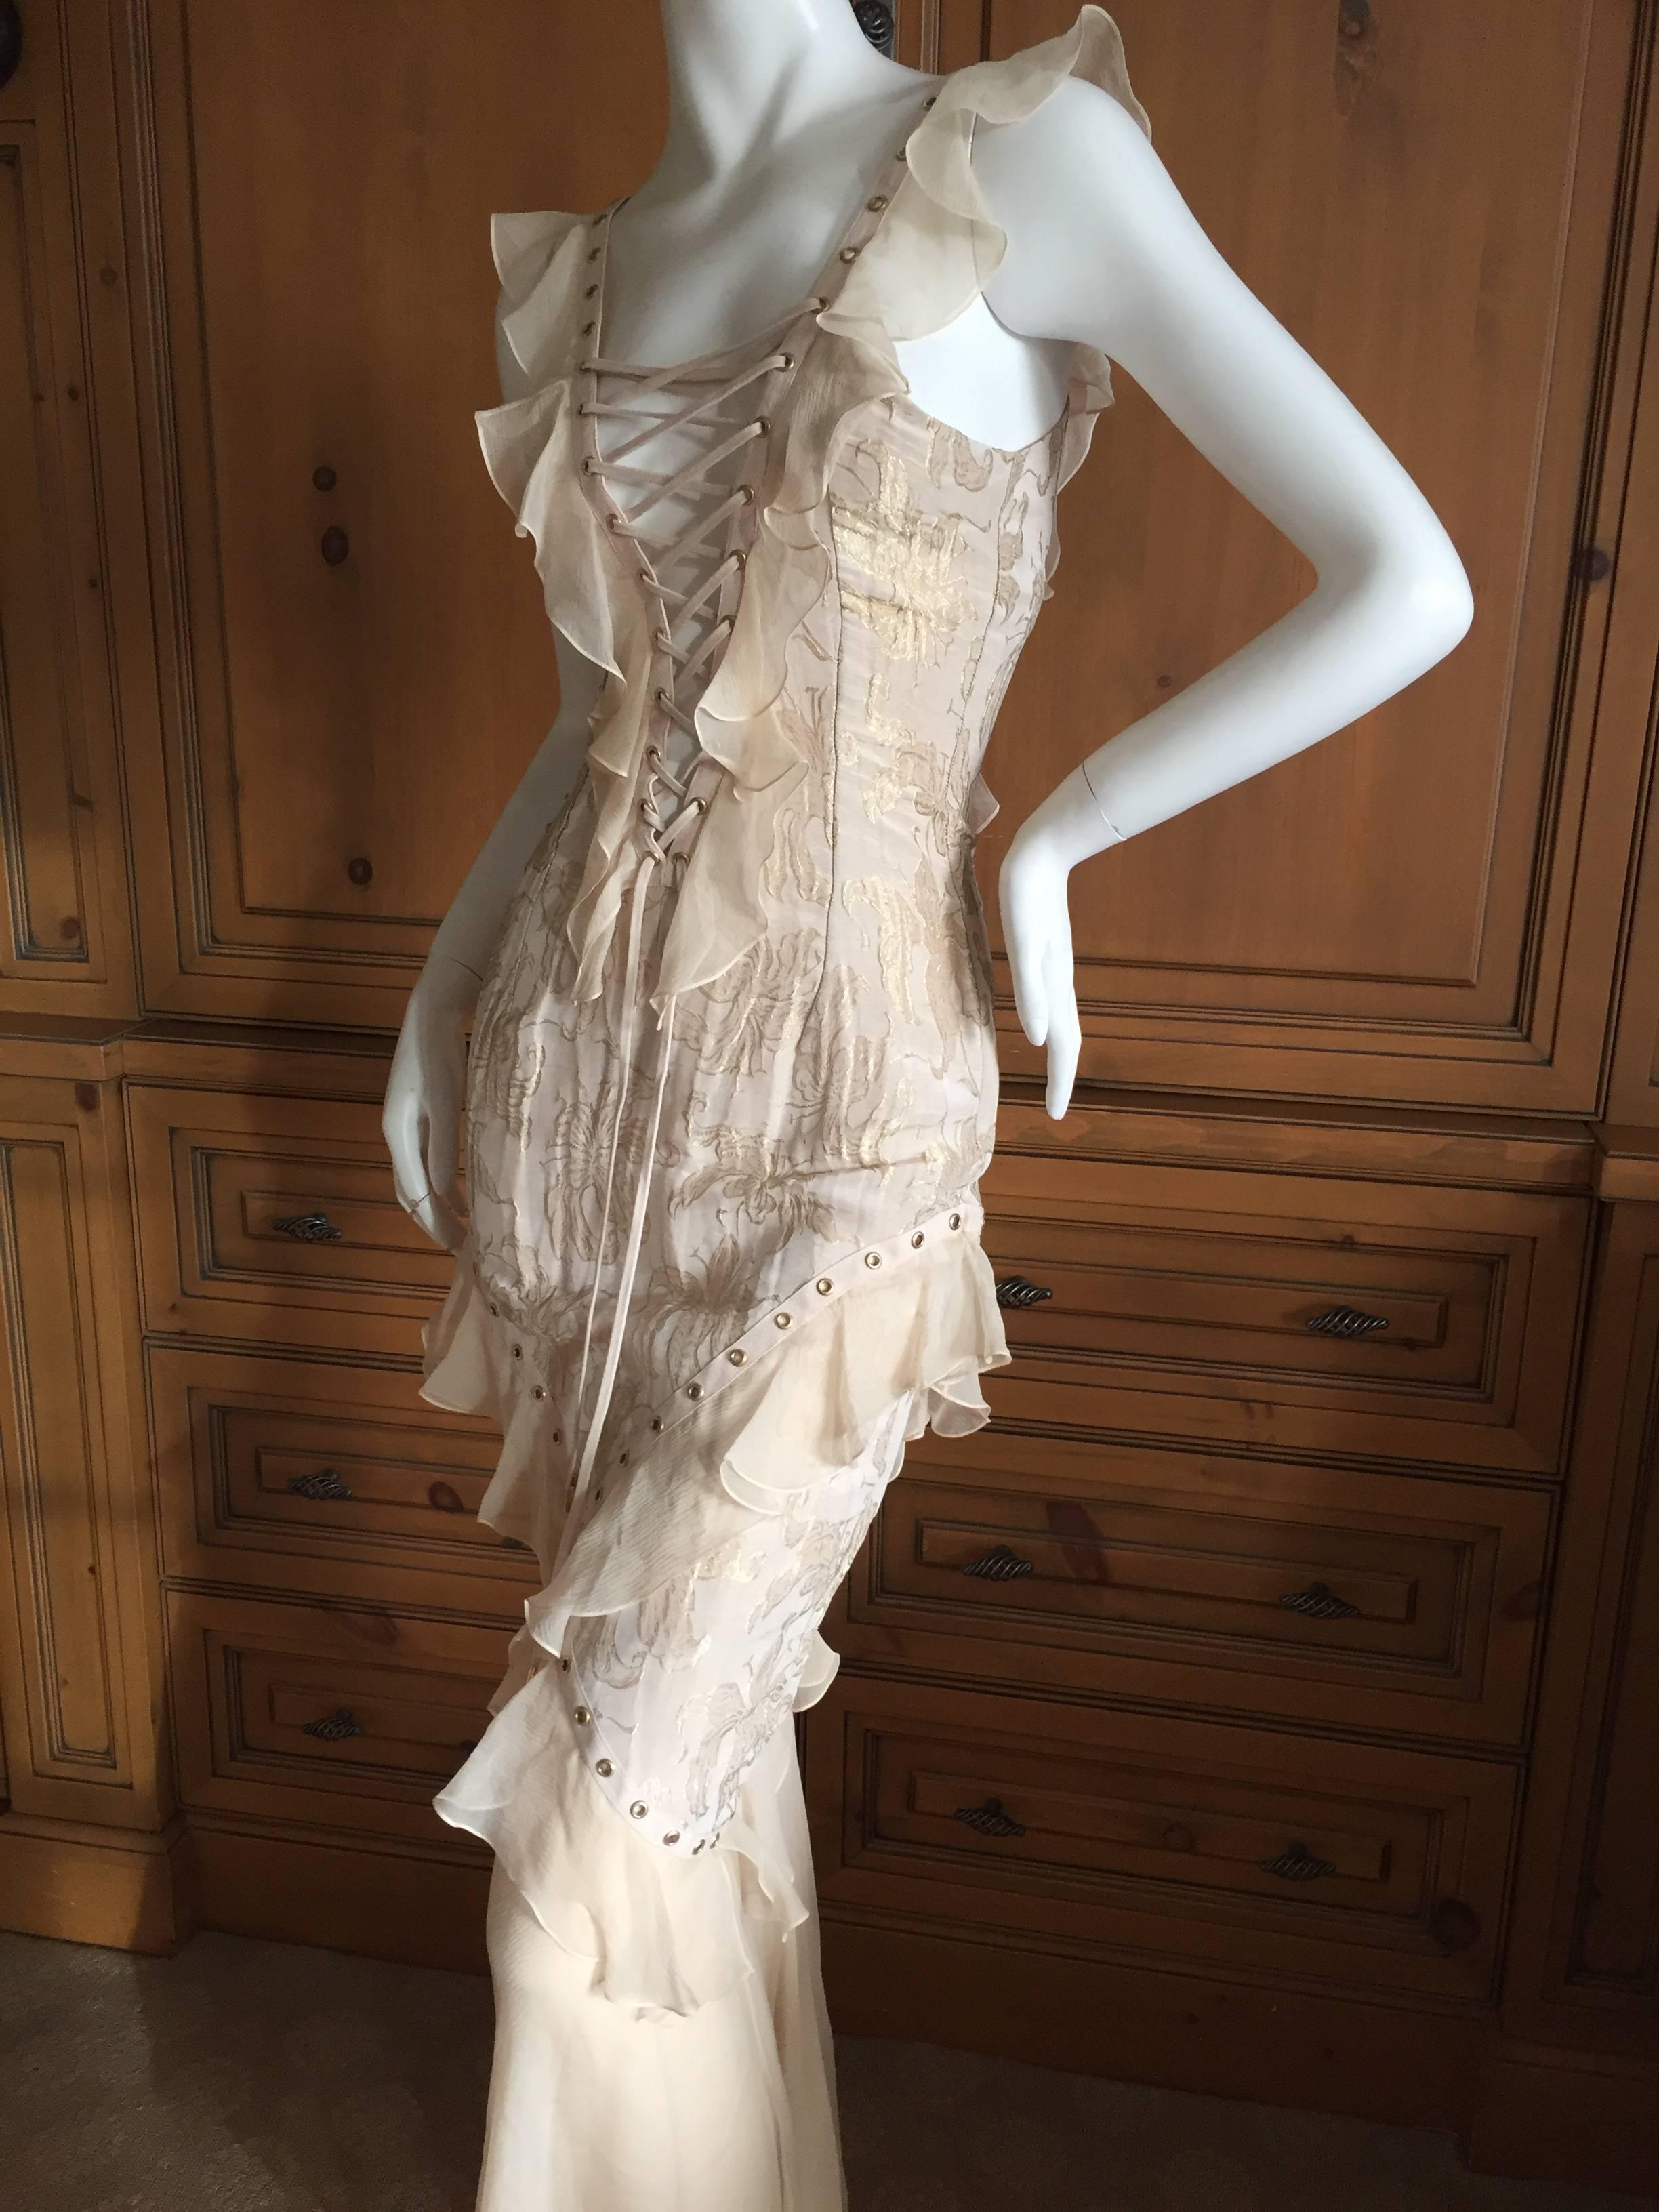 Christian Dior by John Galliano romantic silk long evening dress .
This is such a pretty piece, with grommet details in the straps and corset lacing up the low plunging neckline.
Pure Galliano, pure delight.
This is marked size 36, but seems to run